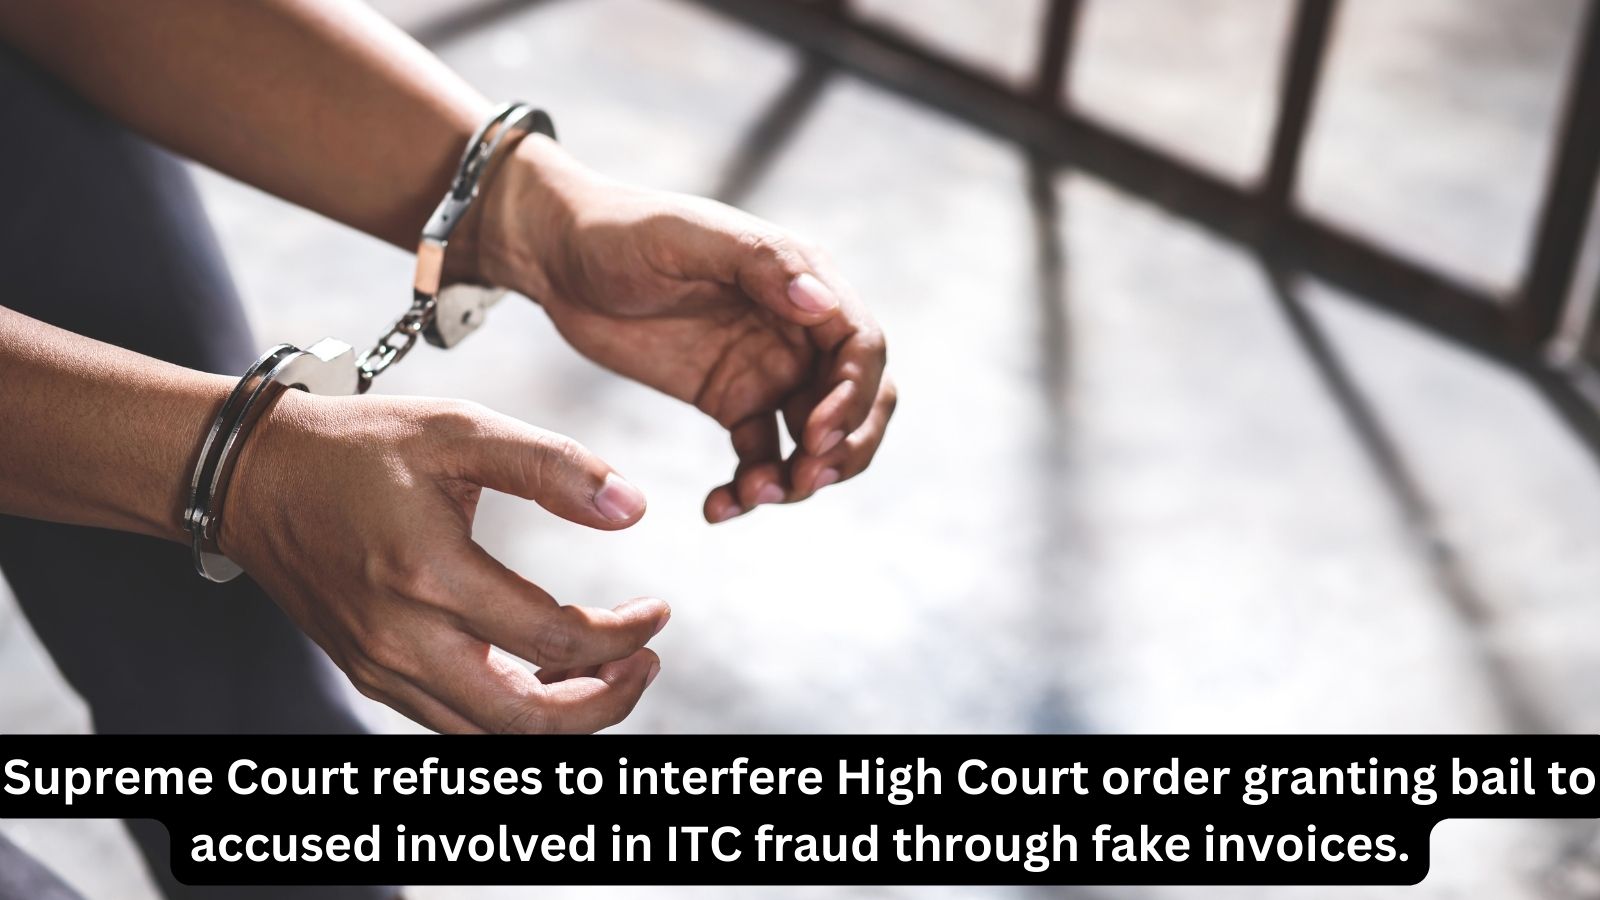 Supreme Court refuses to interfere High Court order granting bail to accused involved in ITC fraud through fake invoices.